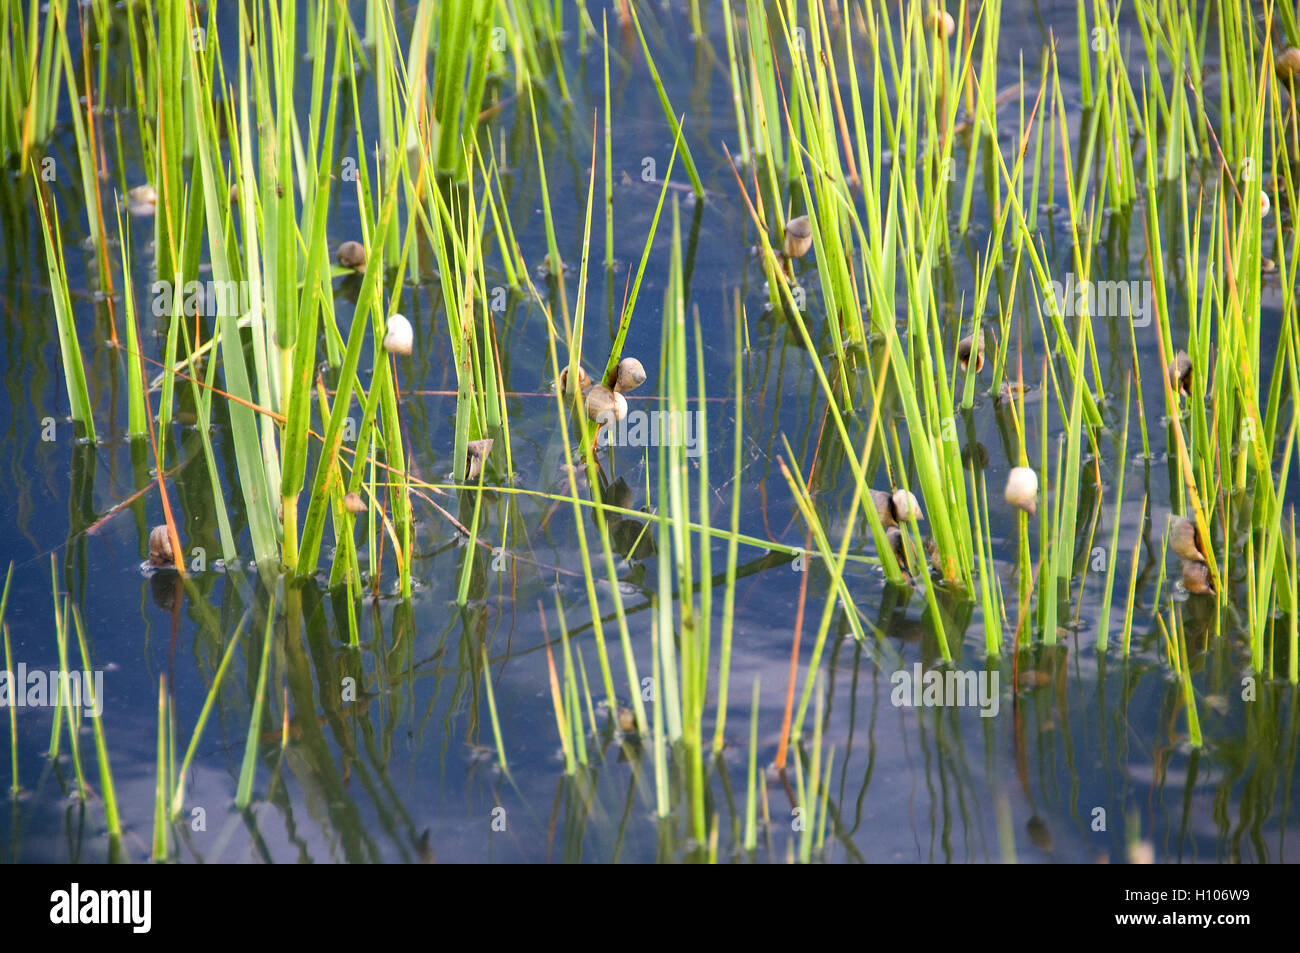 Aquatic vegetation stalks on the inshore flats off Florida's pristine Intercoastal waterway is often covered with snails. Stock Photo